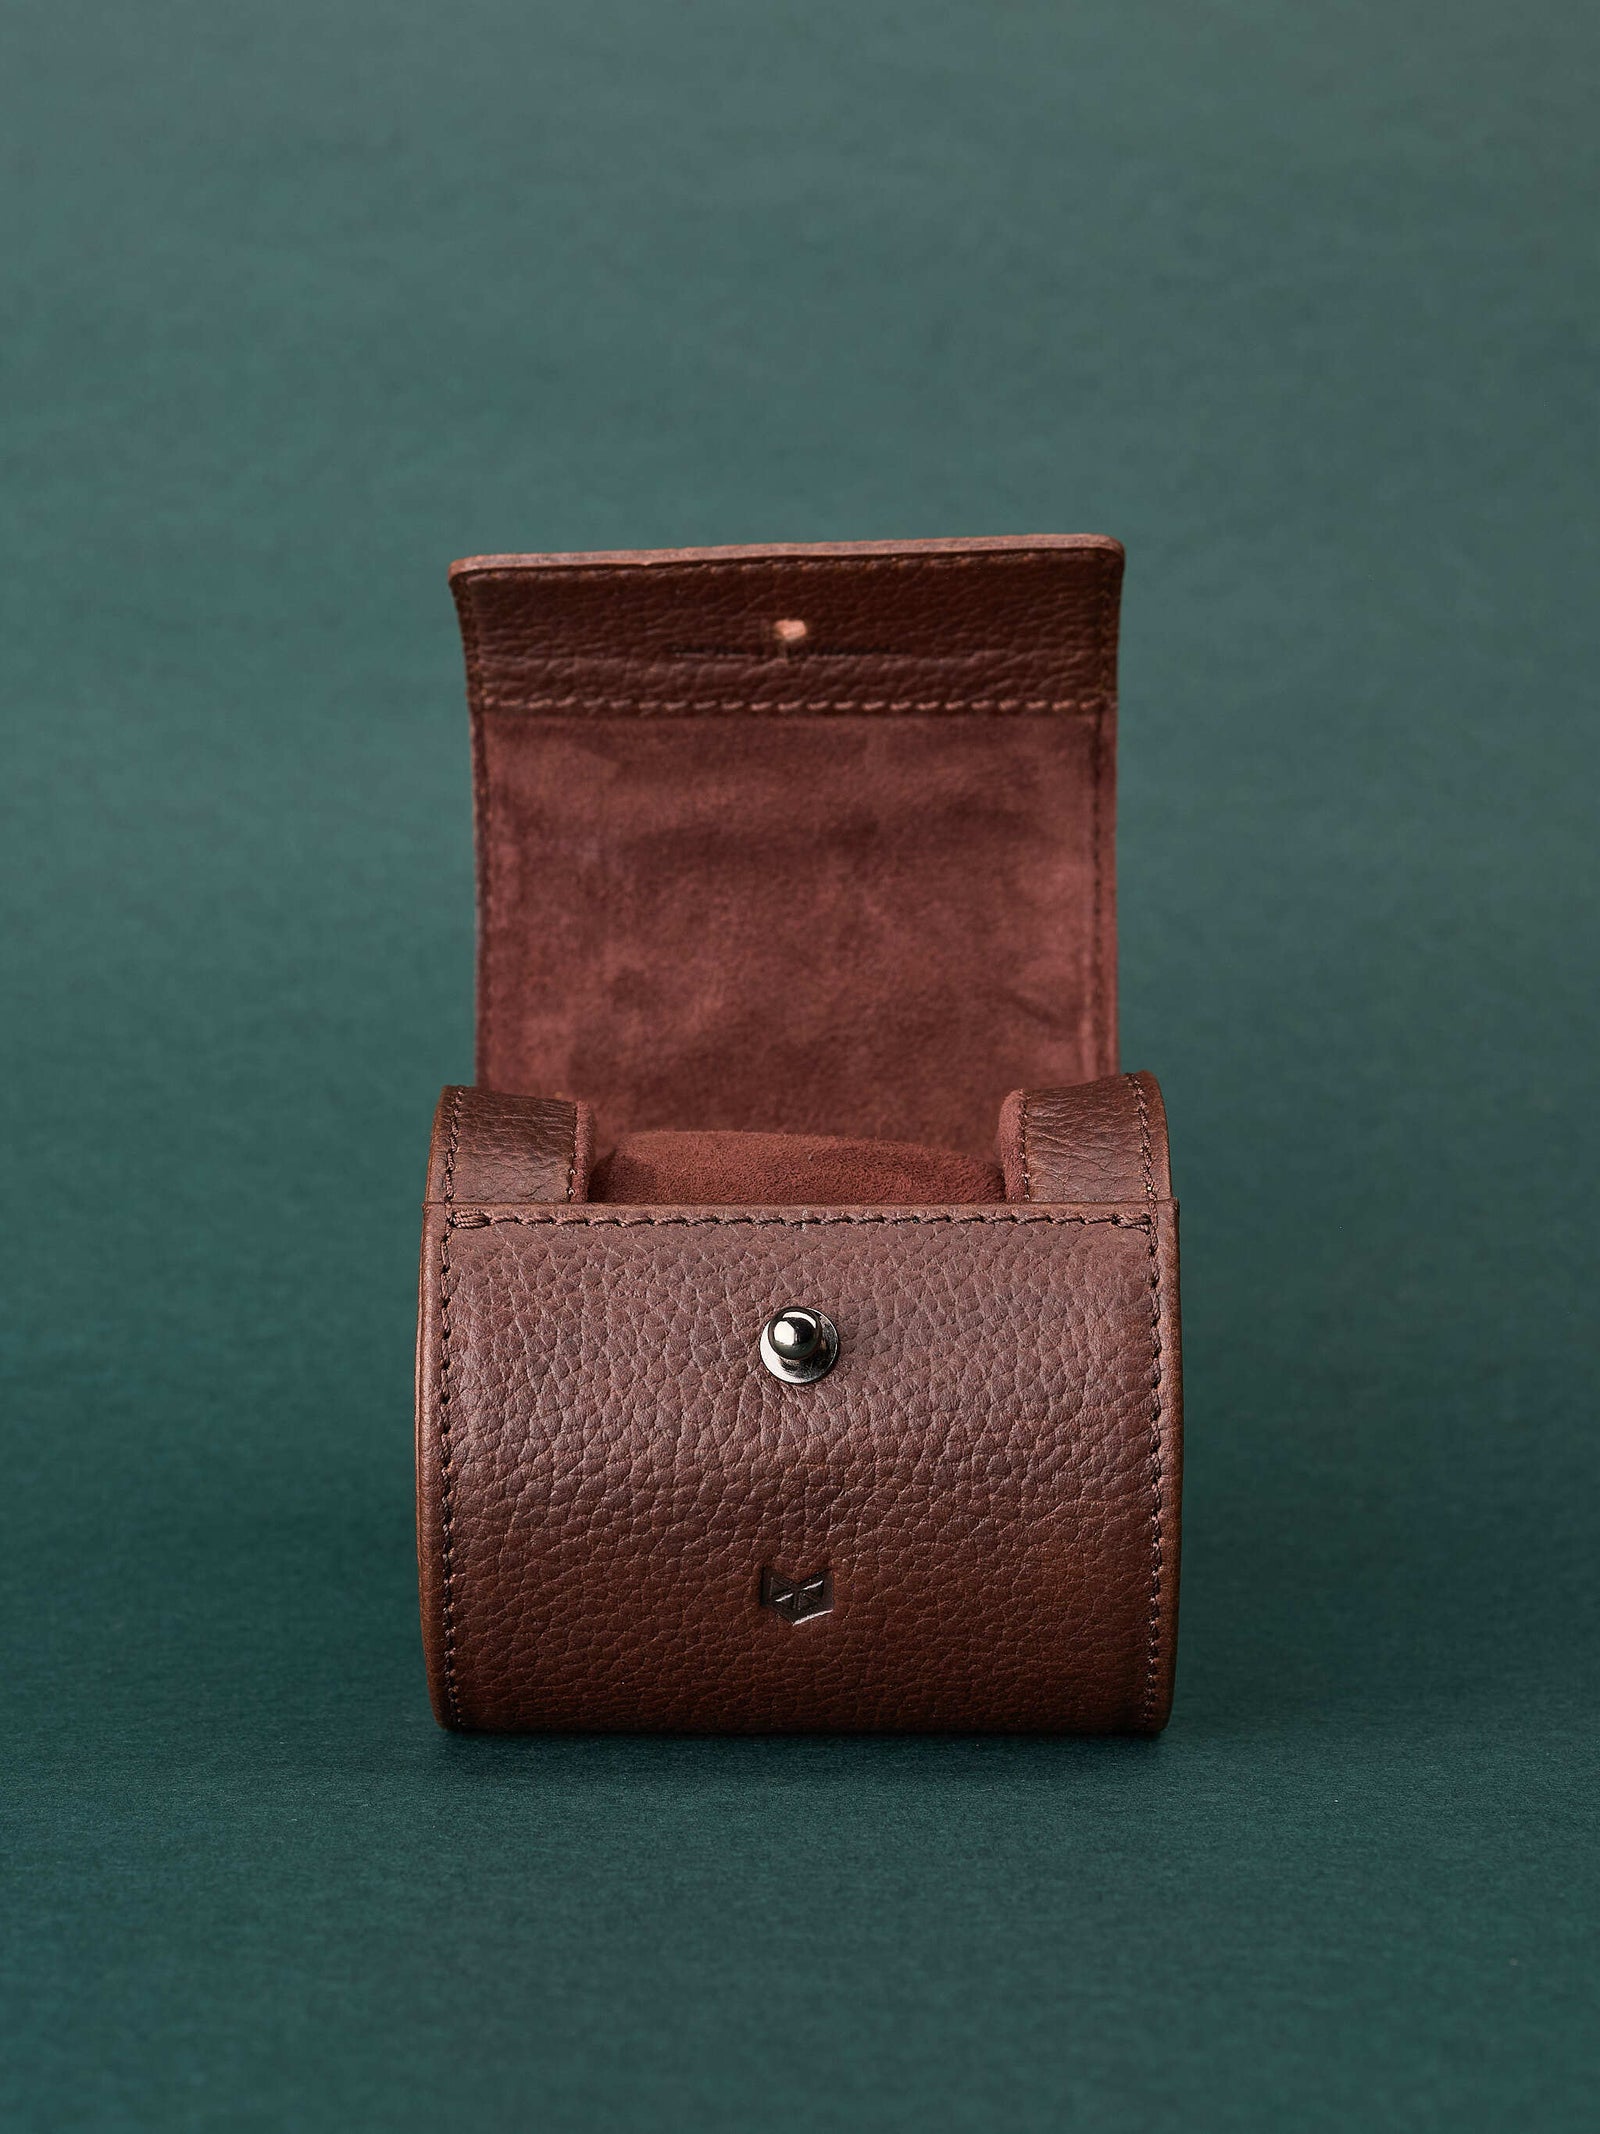 Nickel pin closure. Single watch box for men brown by Capra Leather